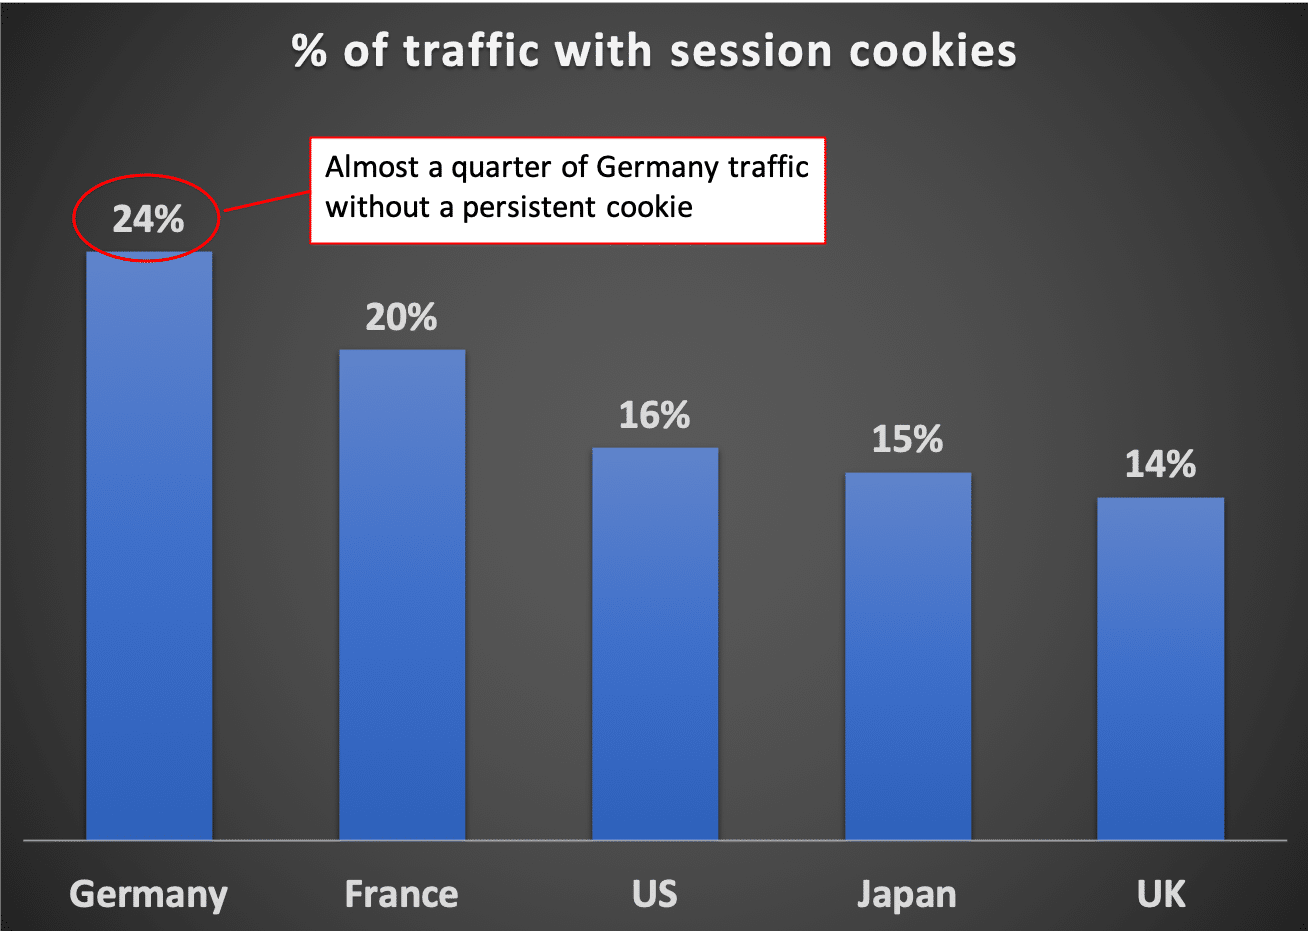 session cookies usage data